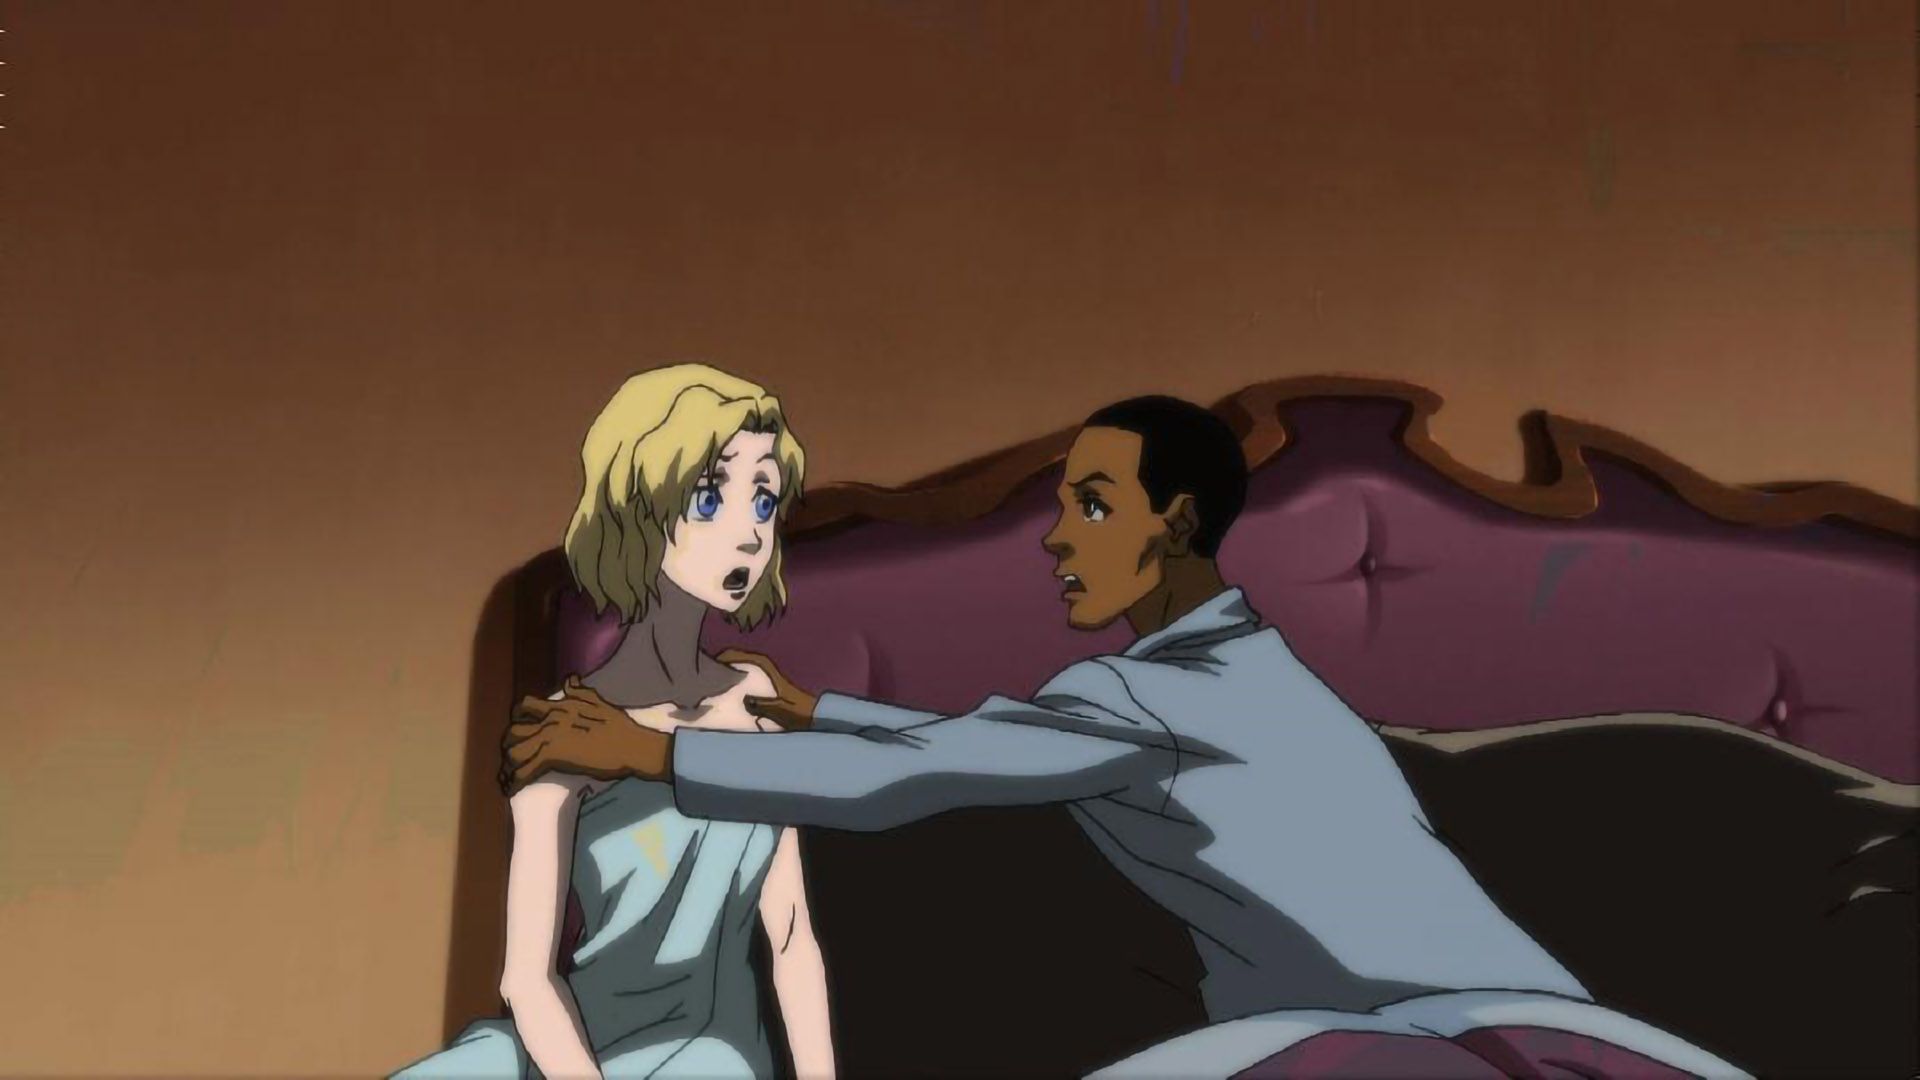 1920px x 1080px - A Date with the Booty Warrior - S3 EP7 - The Boondocks